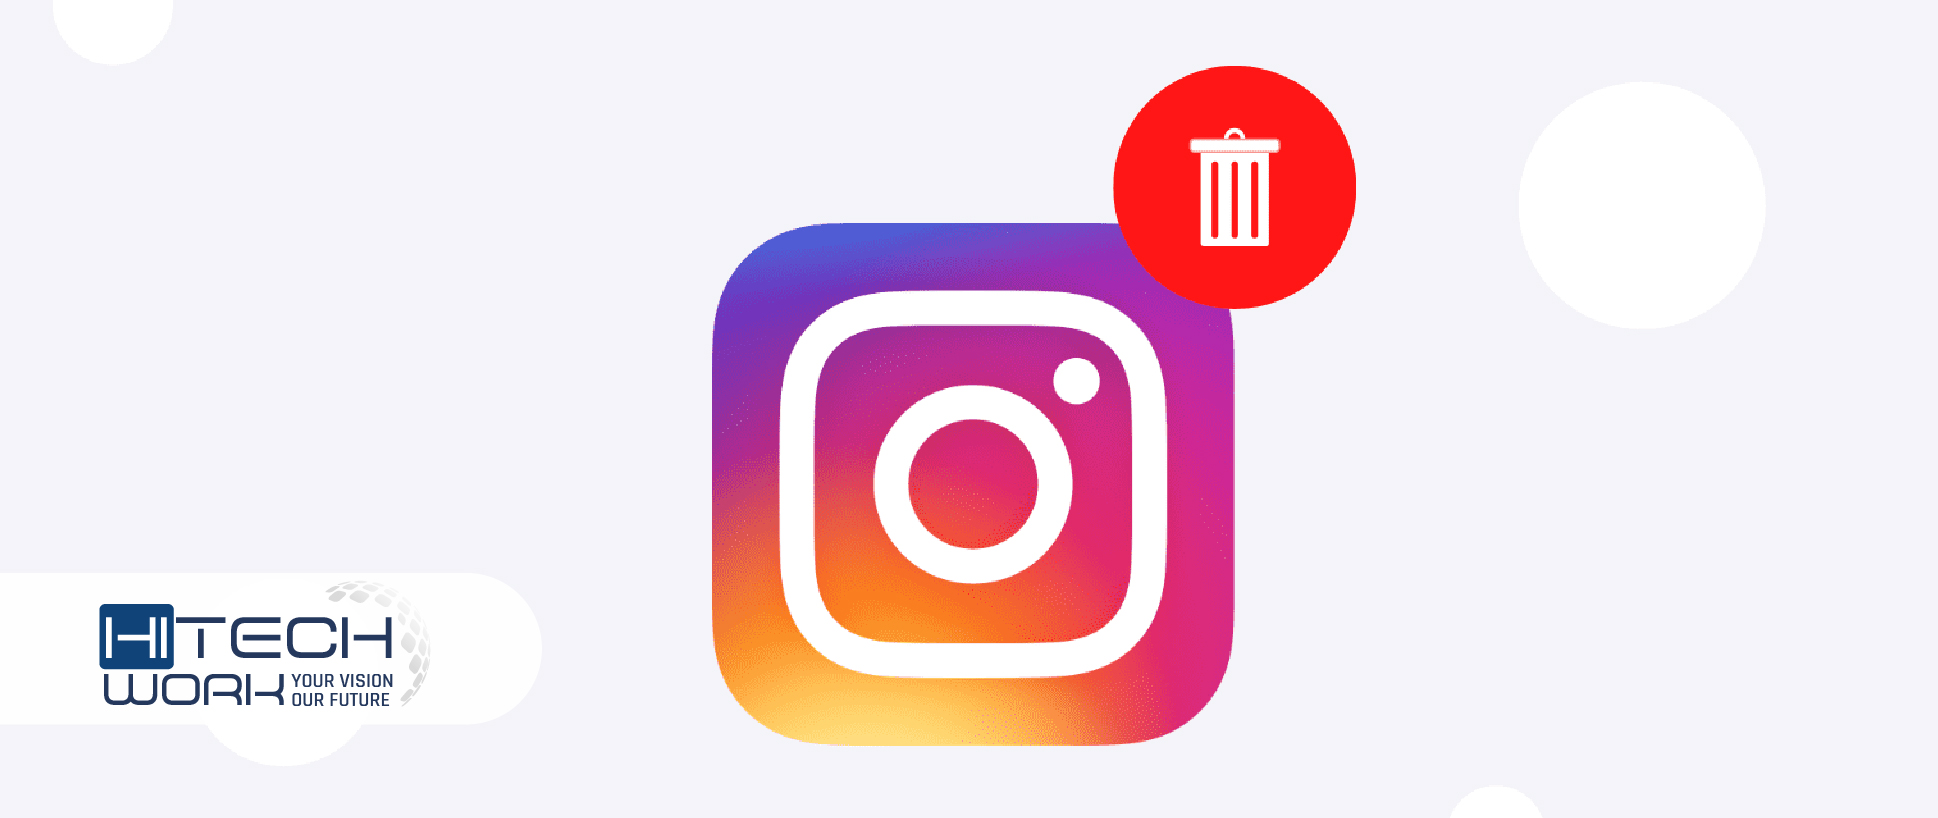 How to disable Instagram account